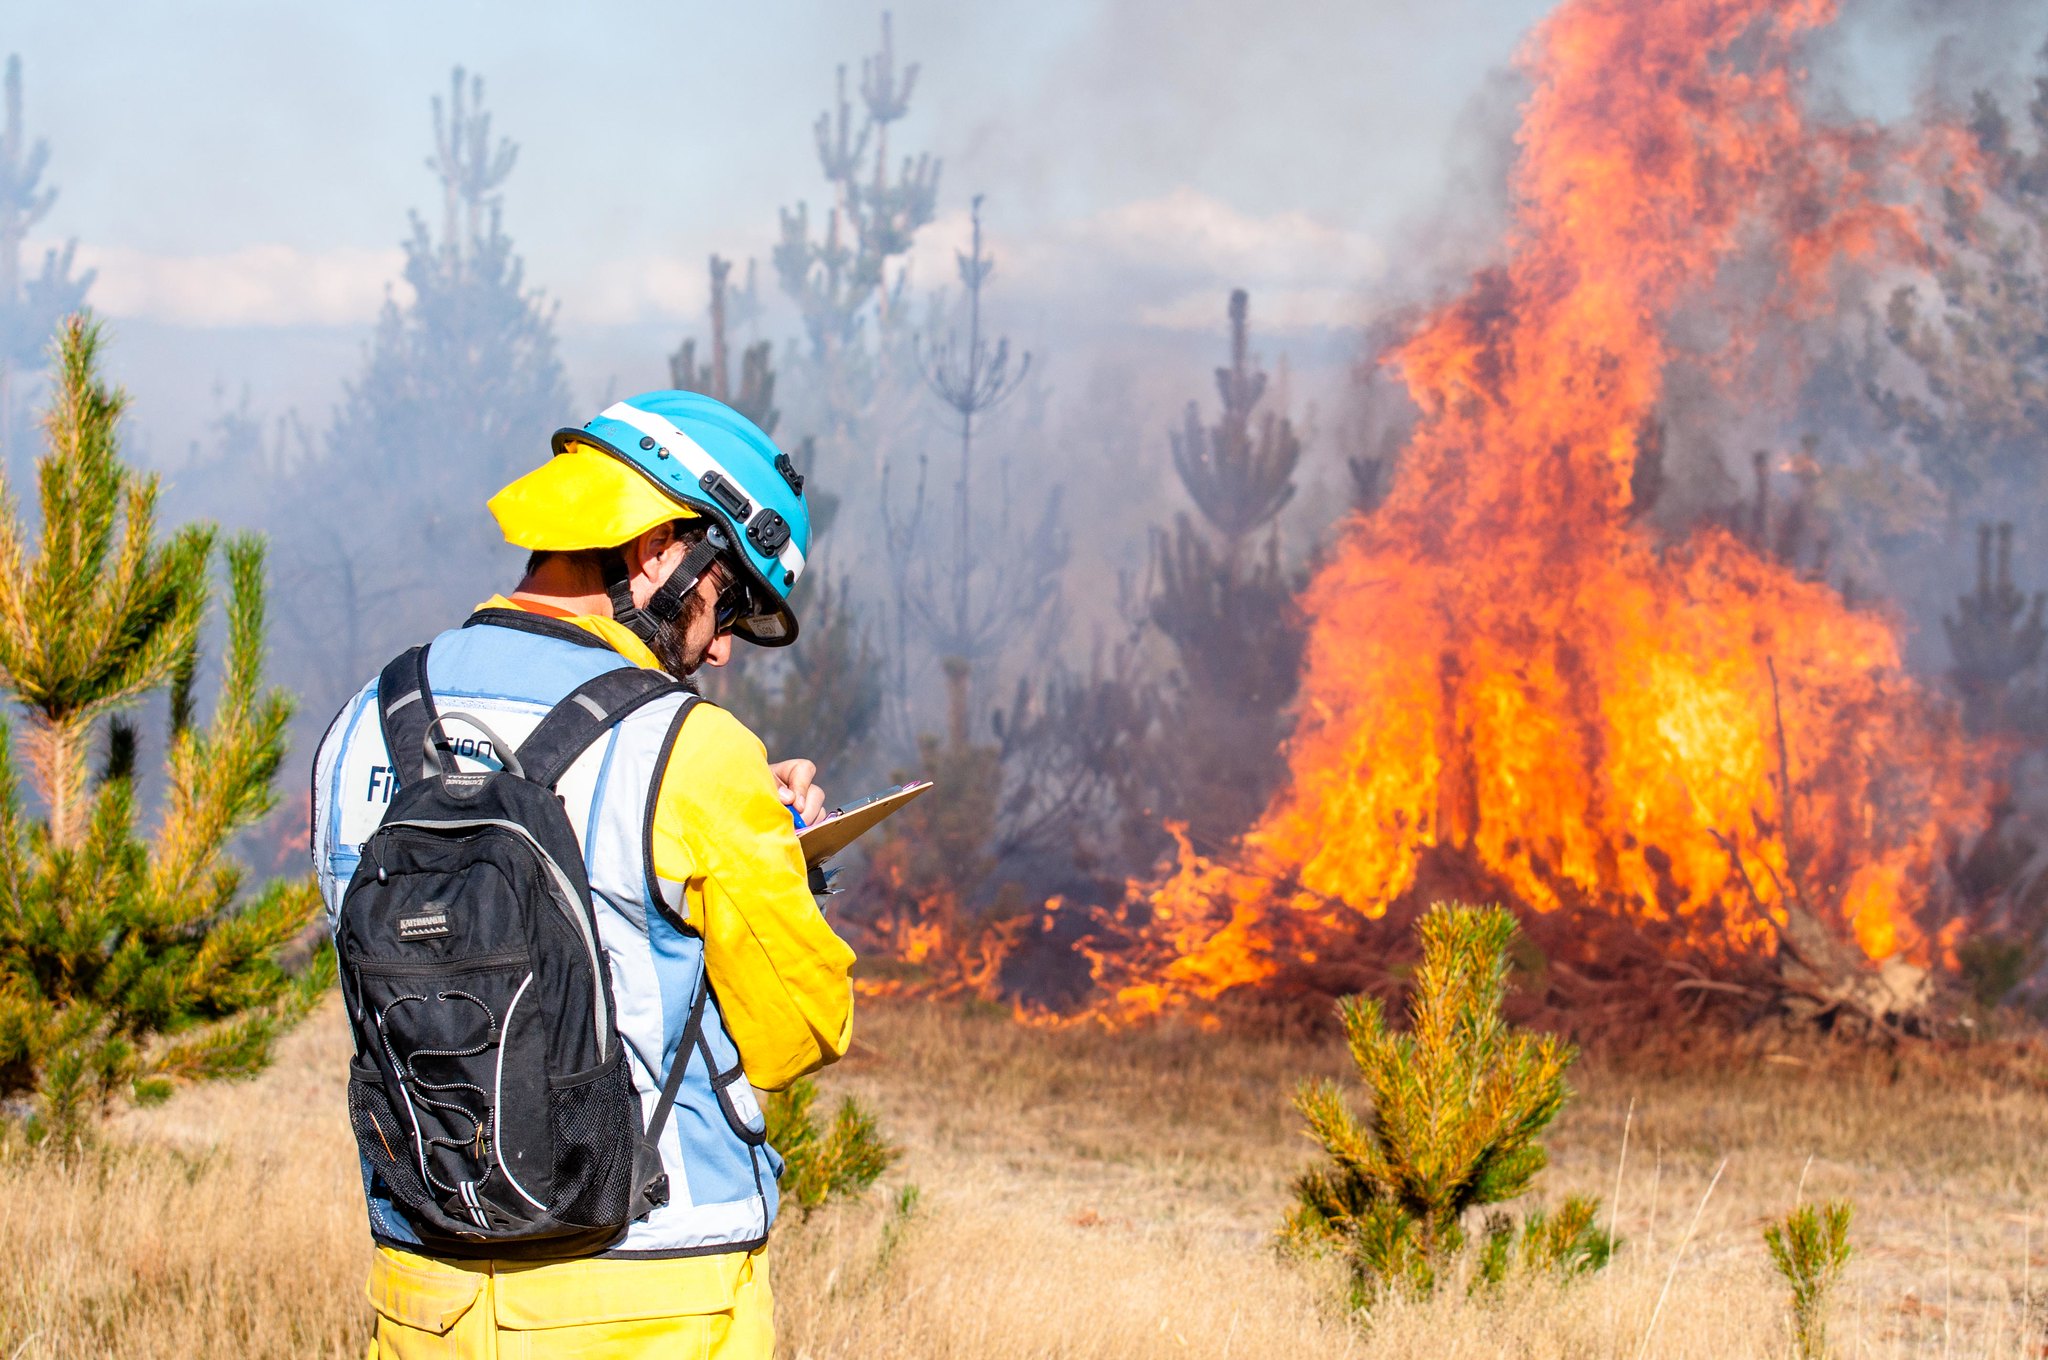 Fire researcher standing in front of a wildfire writing notes on a clipboard